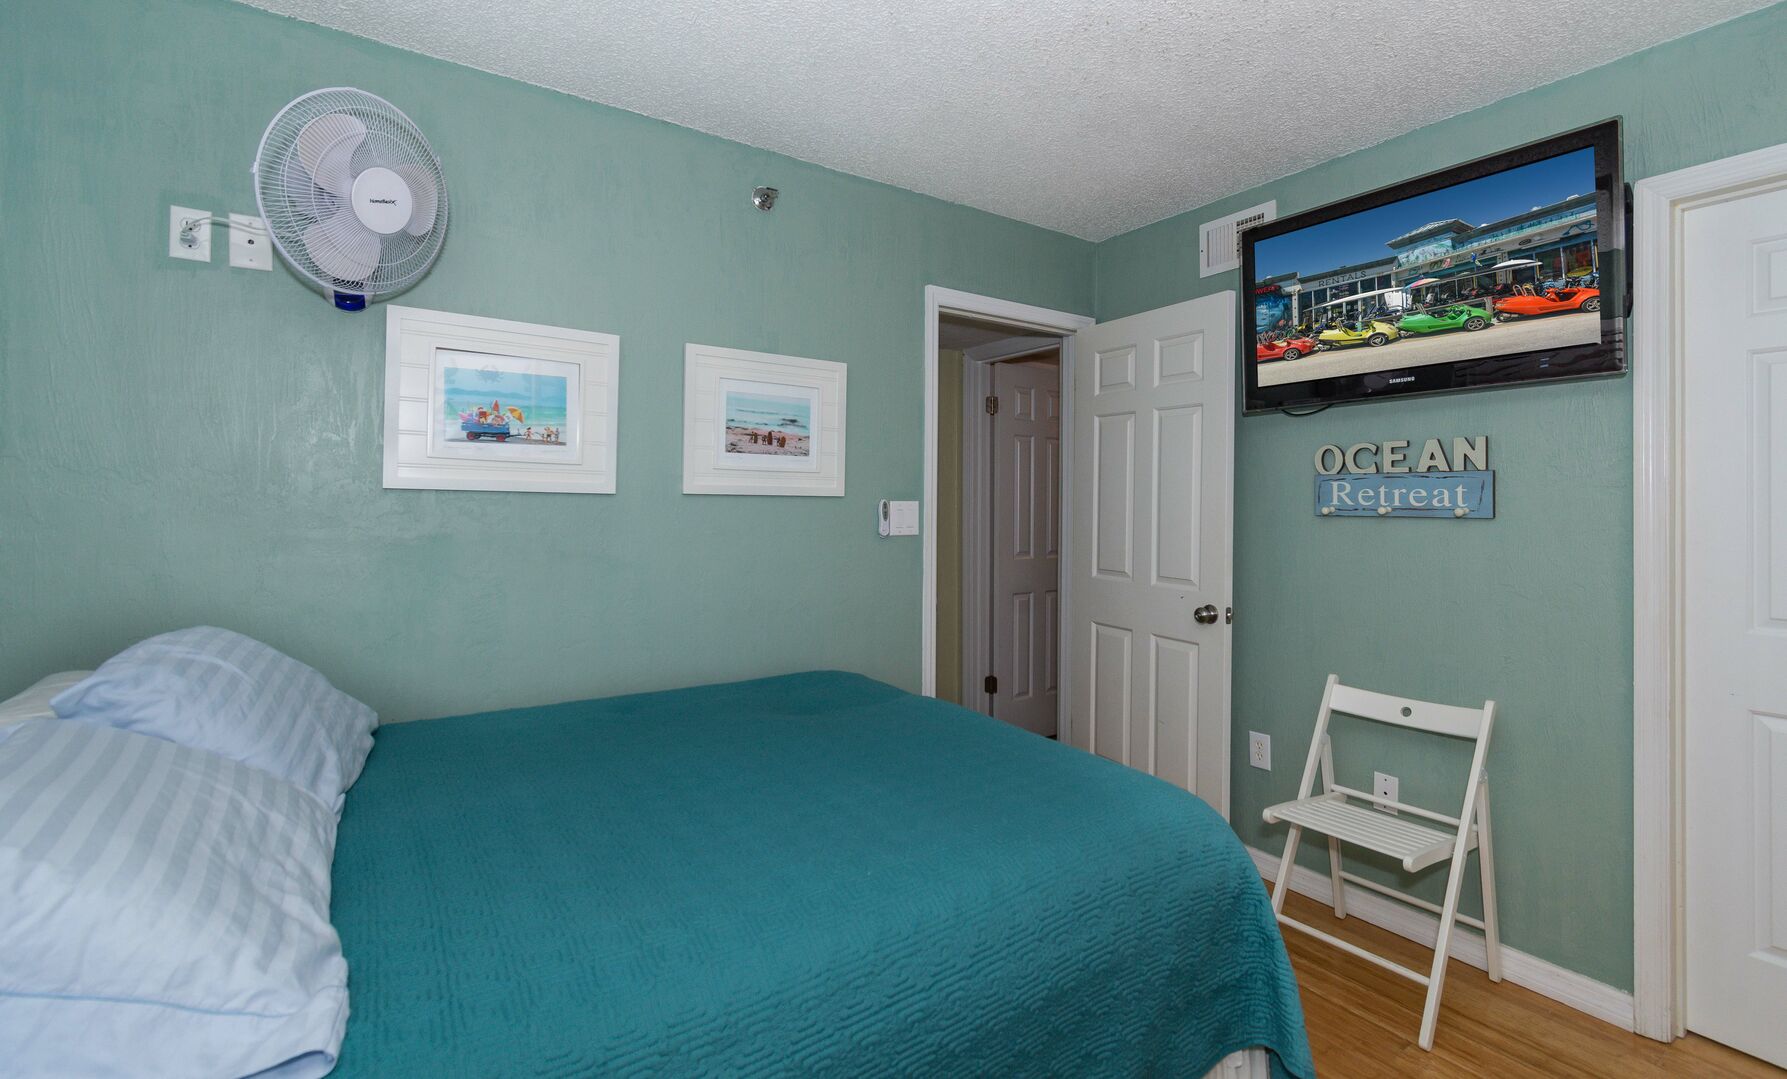 Guest bedroom with a flat-screen TV, large bed, and wall-mounted fan.